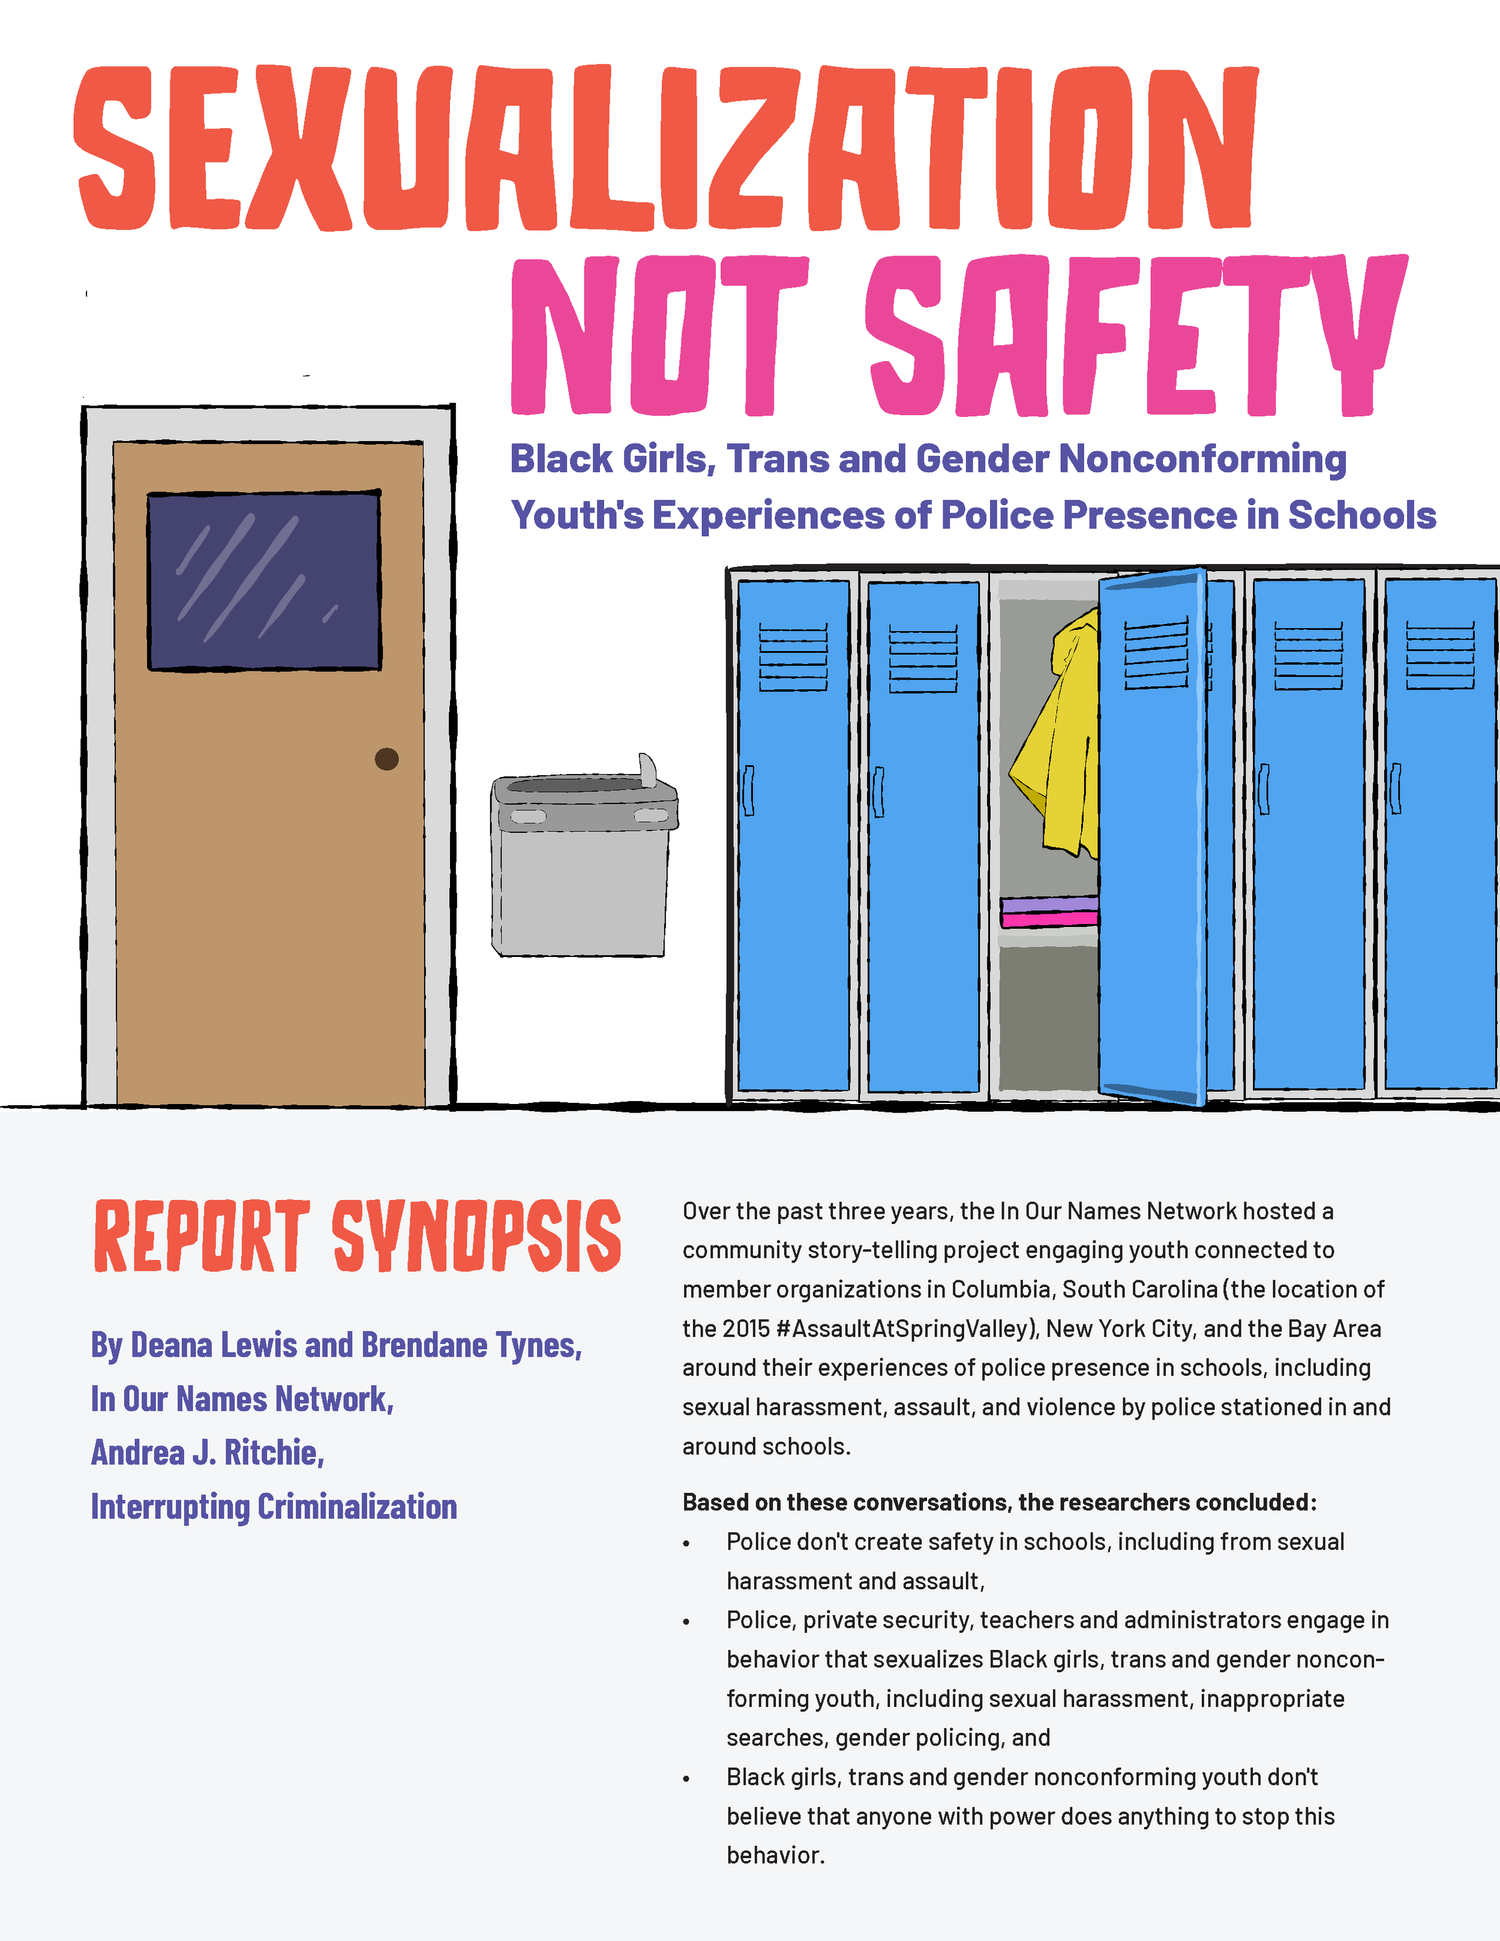 Sexualization Not Safety: Black Girls, Trans, and Gender Nonconforming  Youth's Experiences of Police Presence in Schools: Report Synopsis —  Interrupting Criminalization